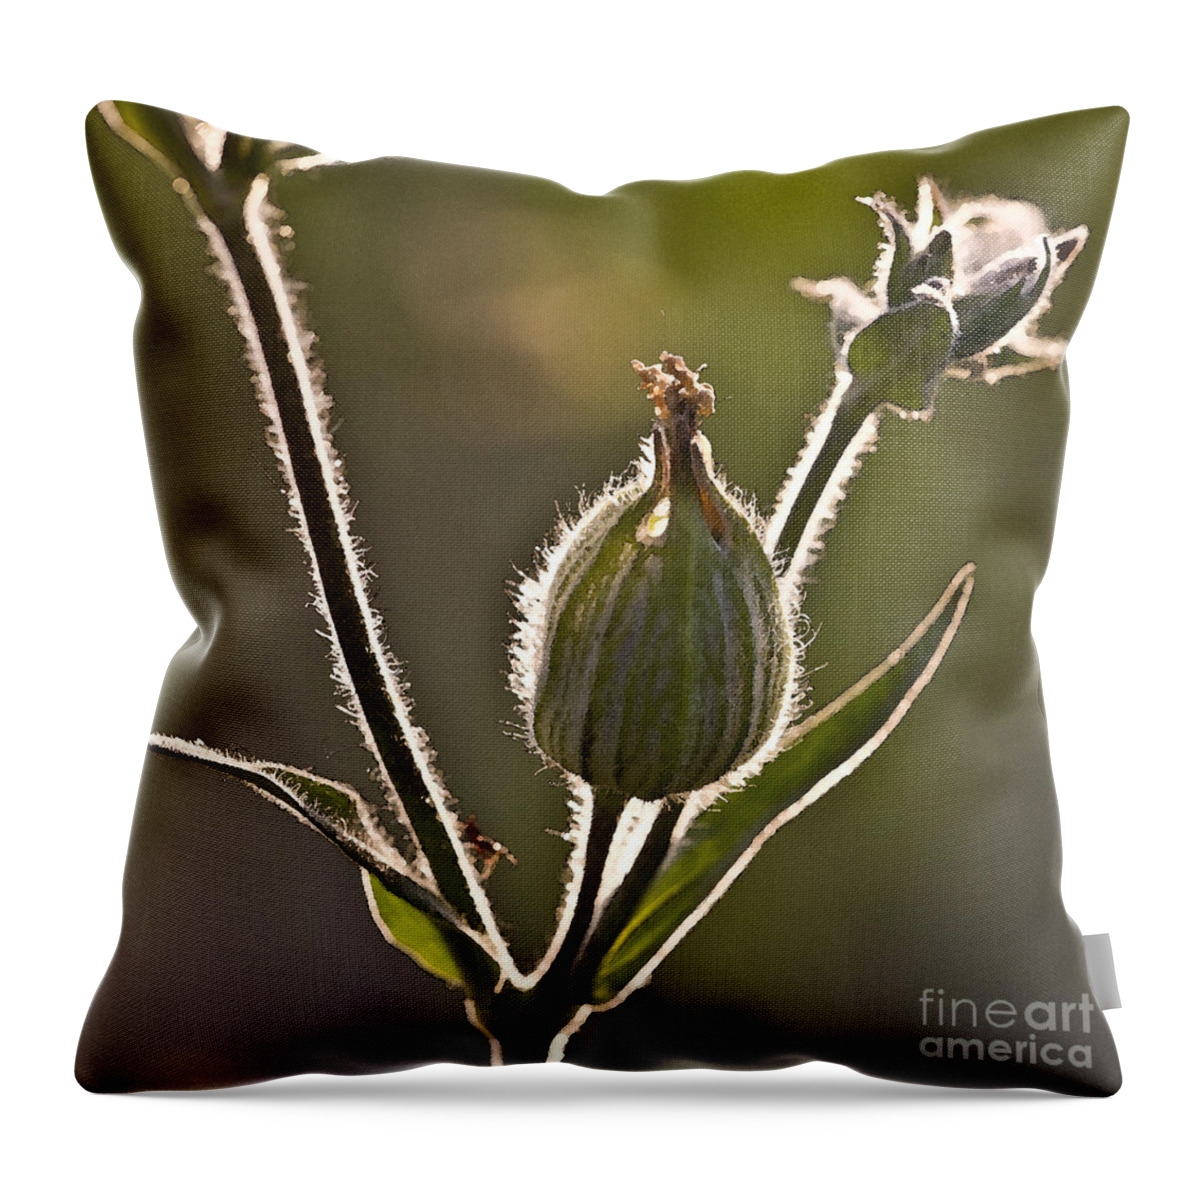 Decorative Throw Pillow featuring the photograph Luminous Halo by Heiko Koehrer-Wagner